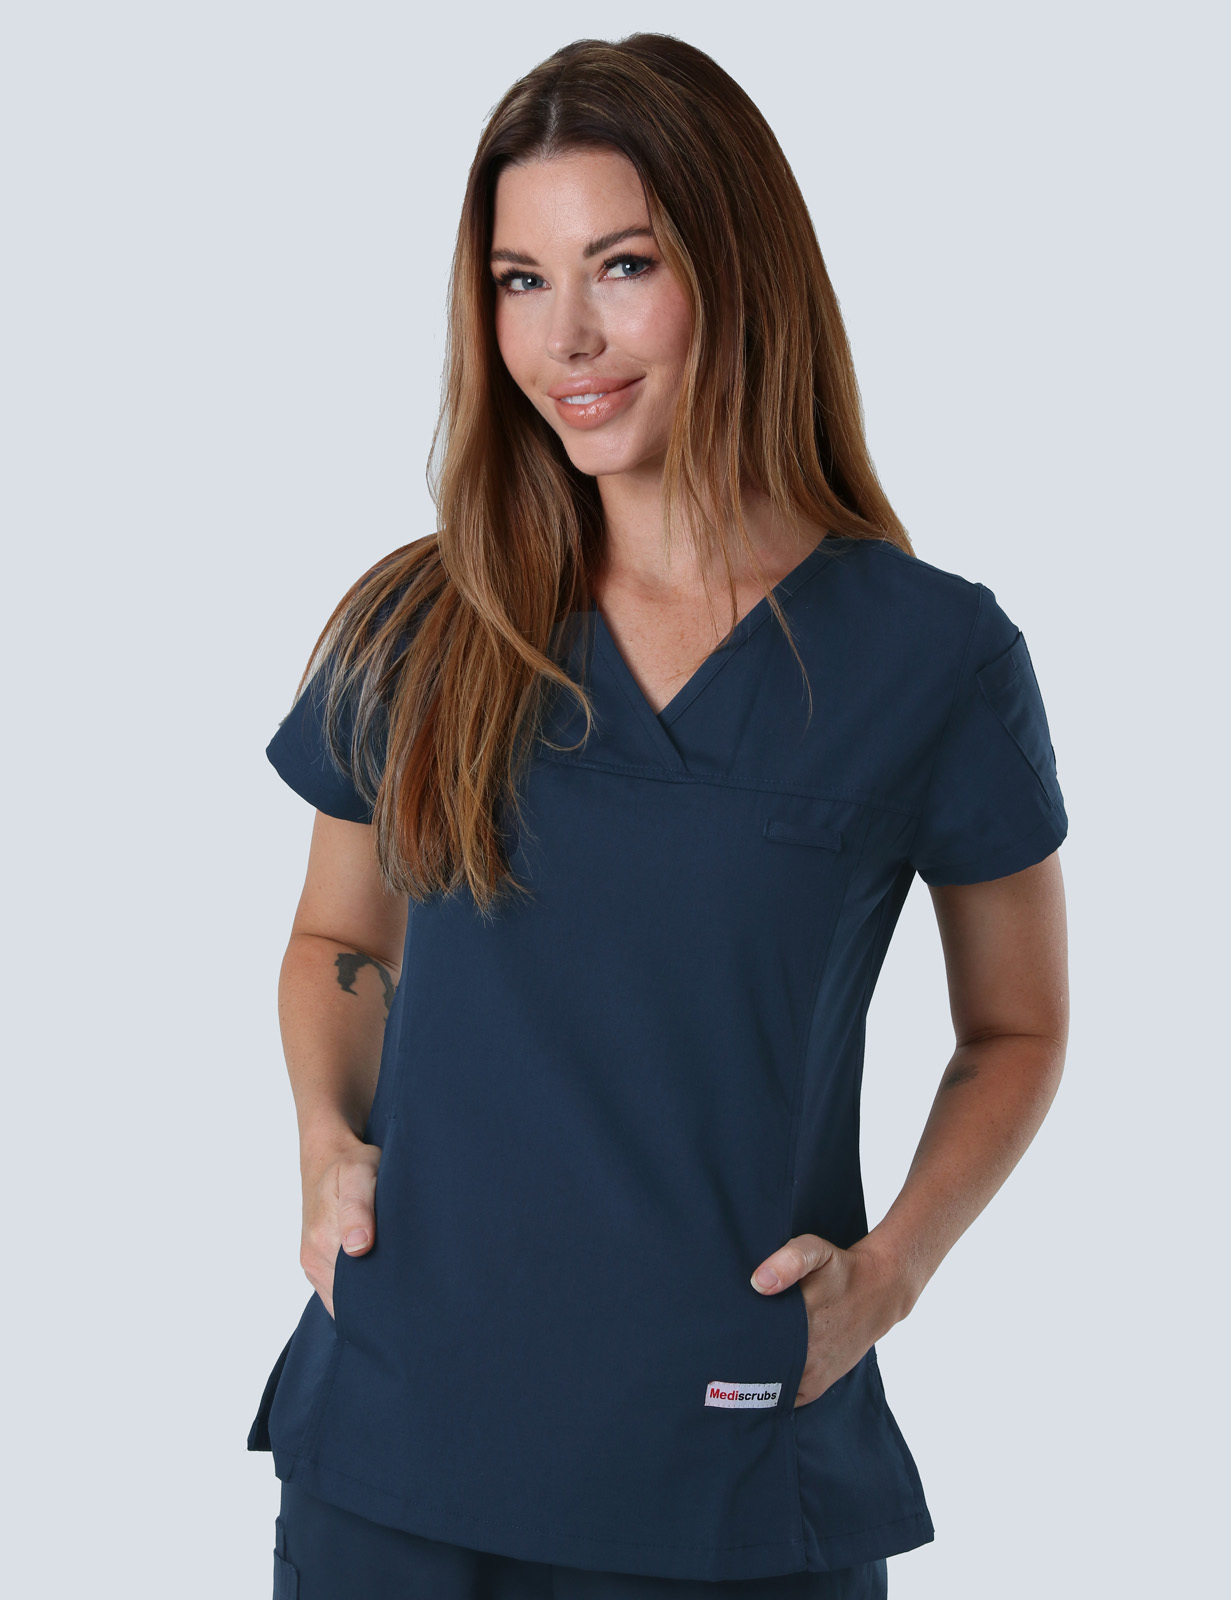 KnG Healthcare - Navy Women's Fit Solid Top